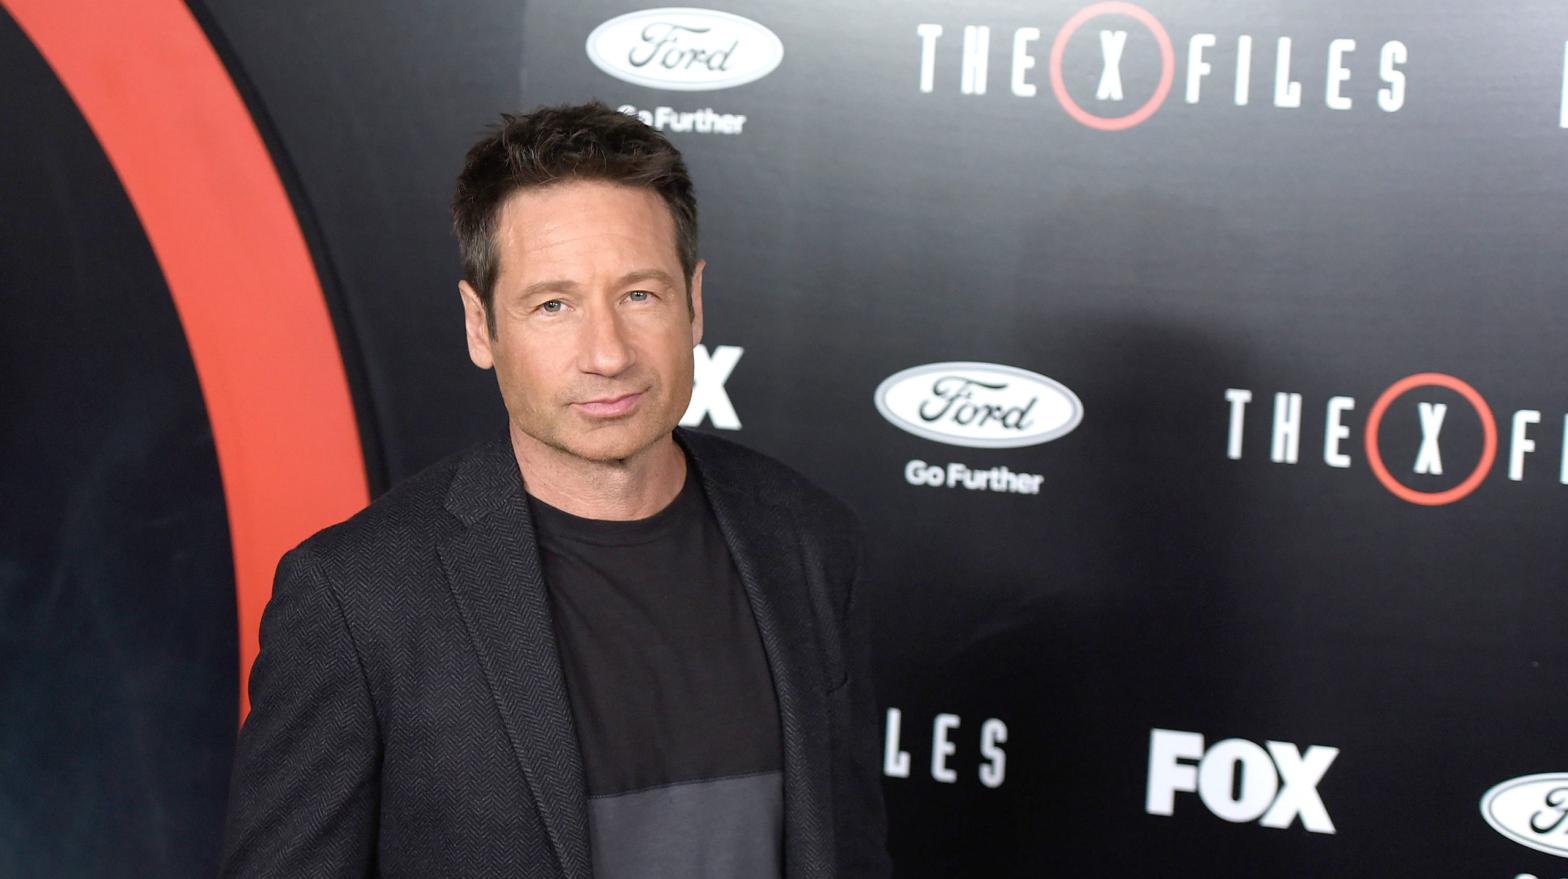 David Duchovny attends the premiere of Fox's The X-Files at California Science Centre on January 12, 2016 in Los Angeles.  (Photo: Angela Weiss, Getty Images)